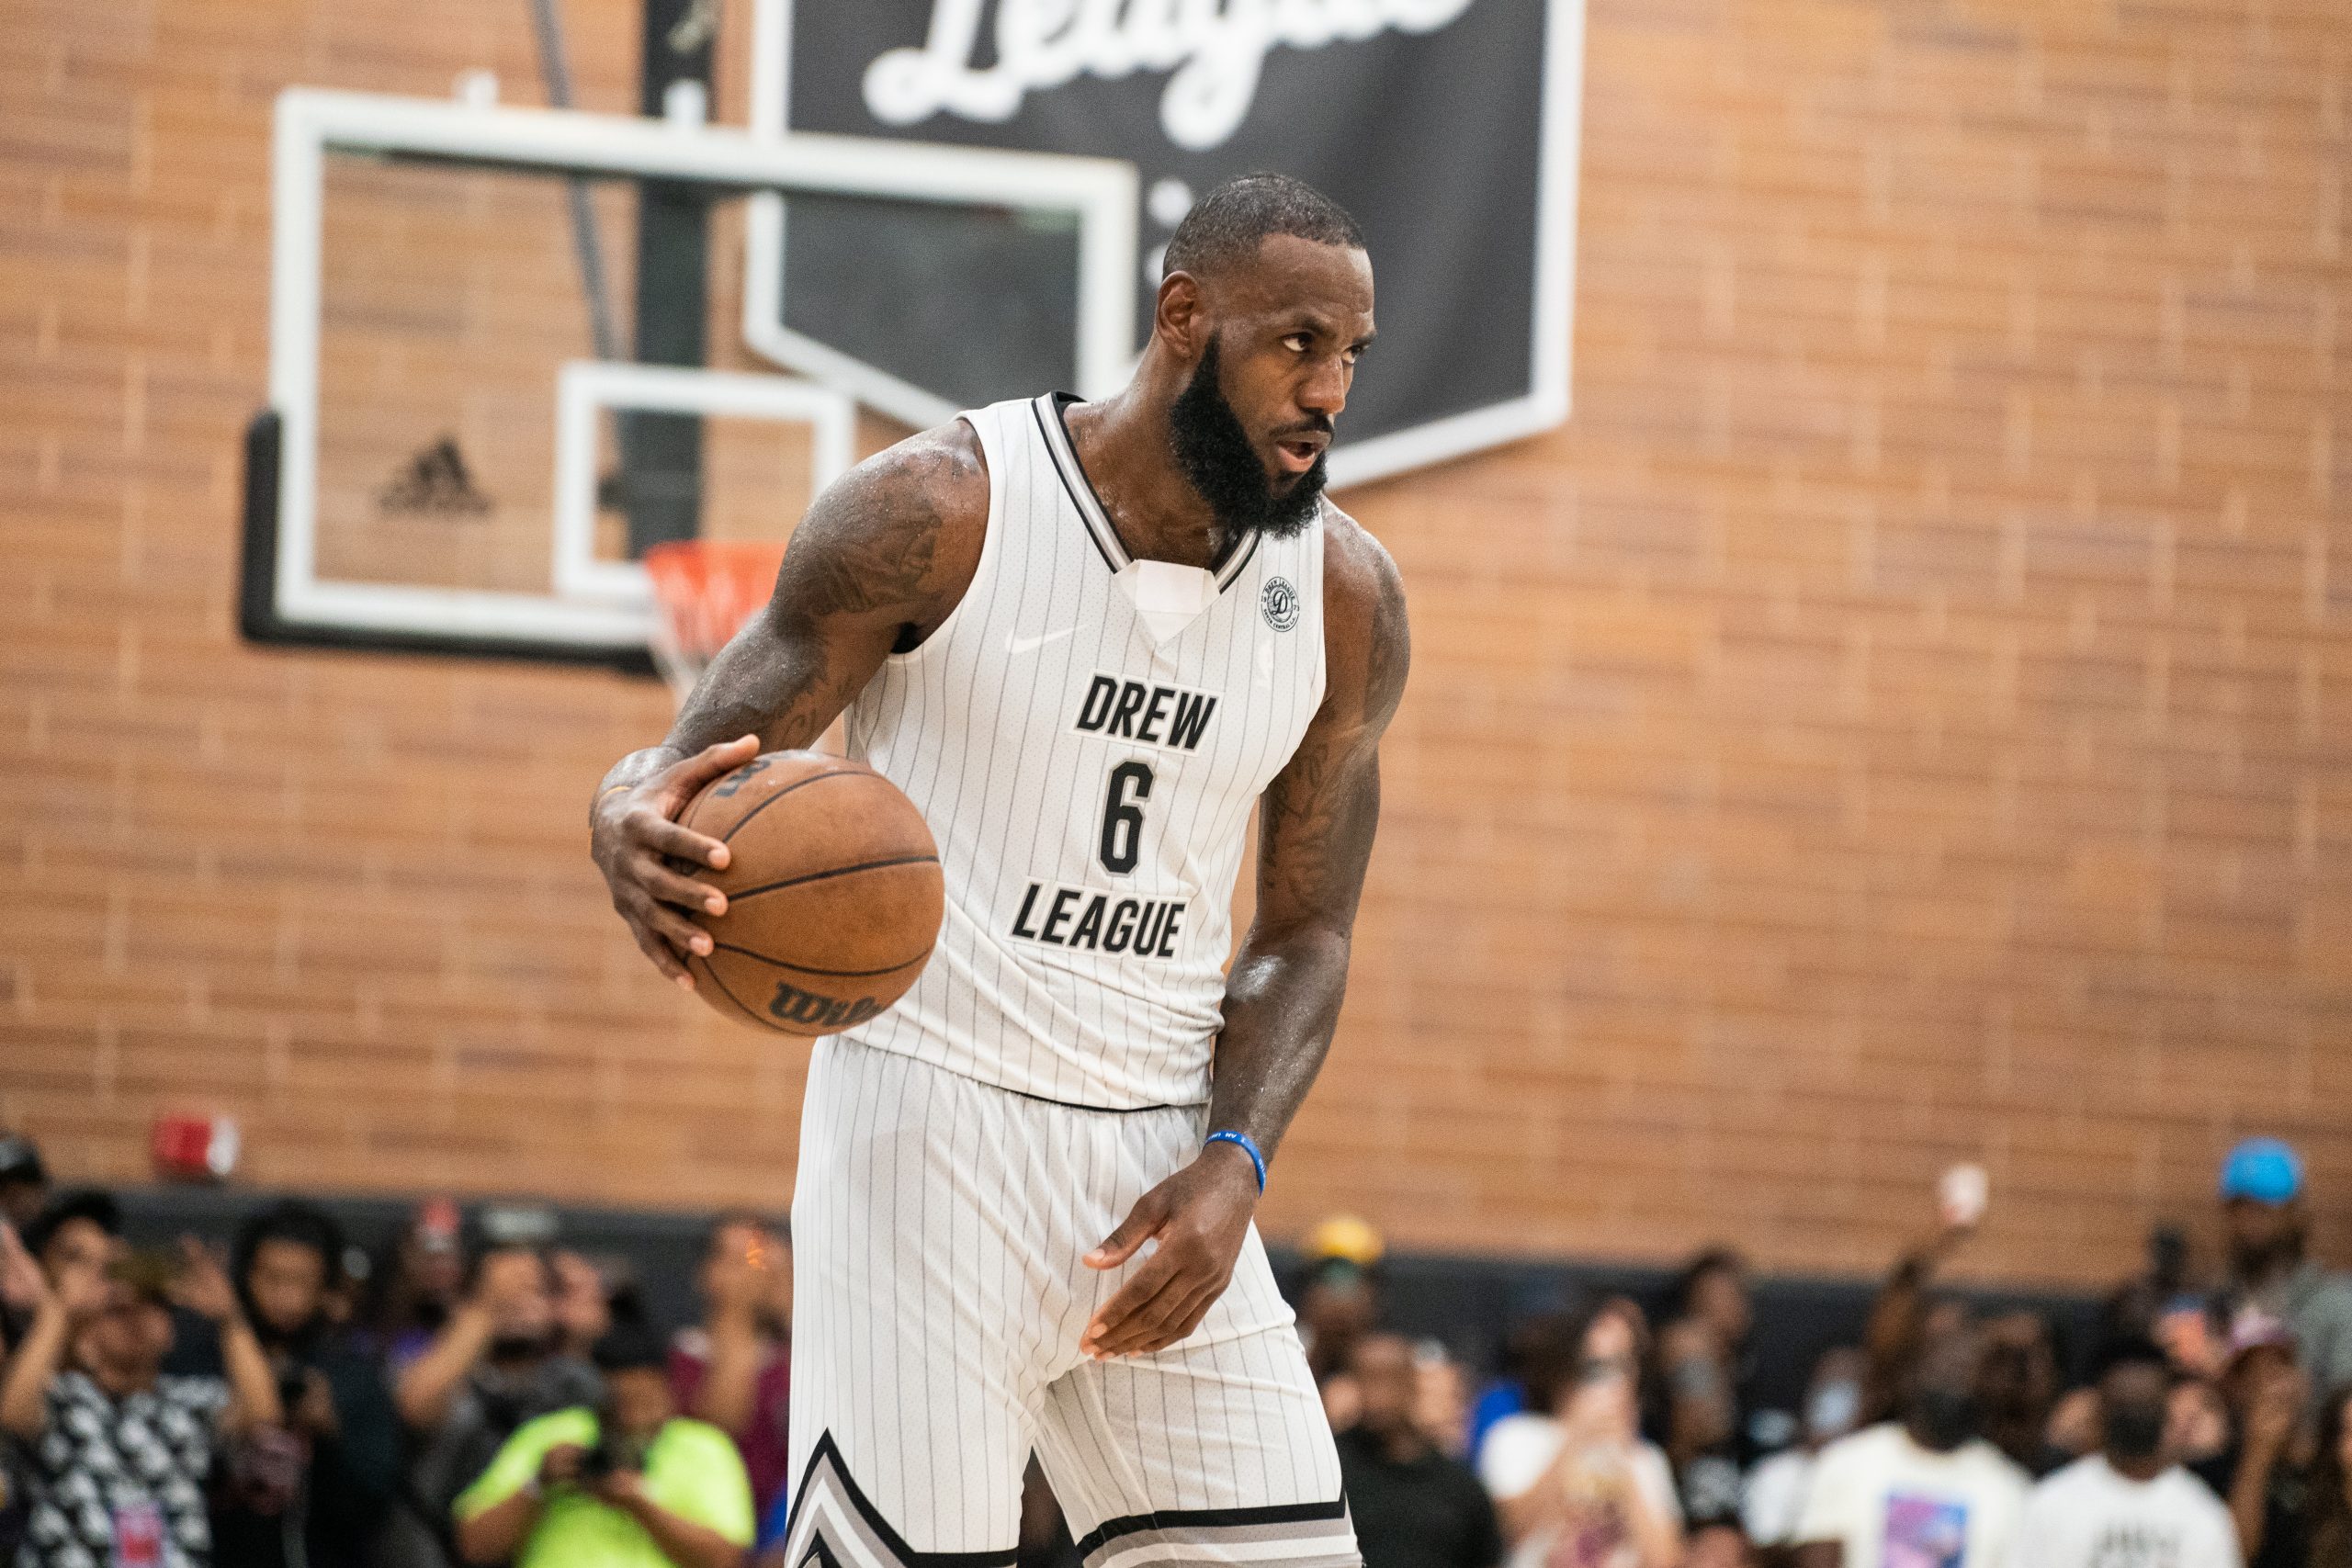 REPORT: Lakers Meet with LeBron James; Agree to Run Offense Through Anthony Davis